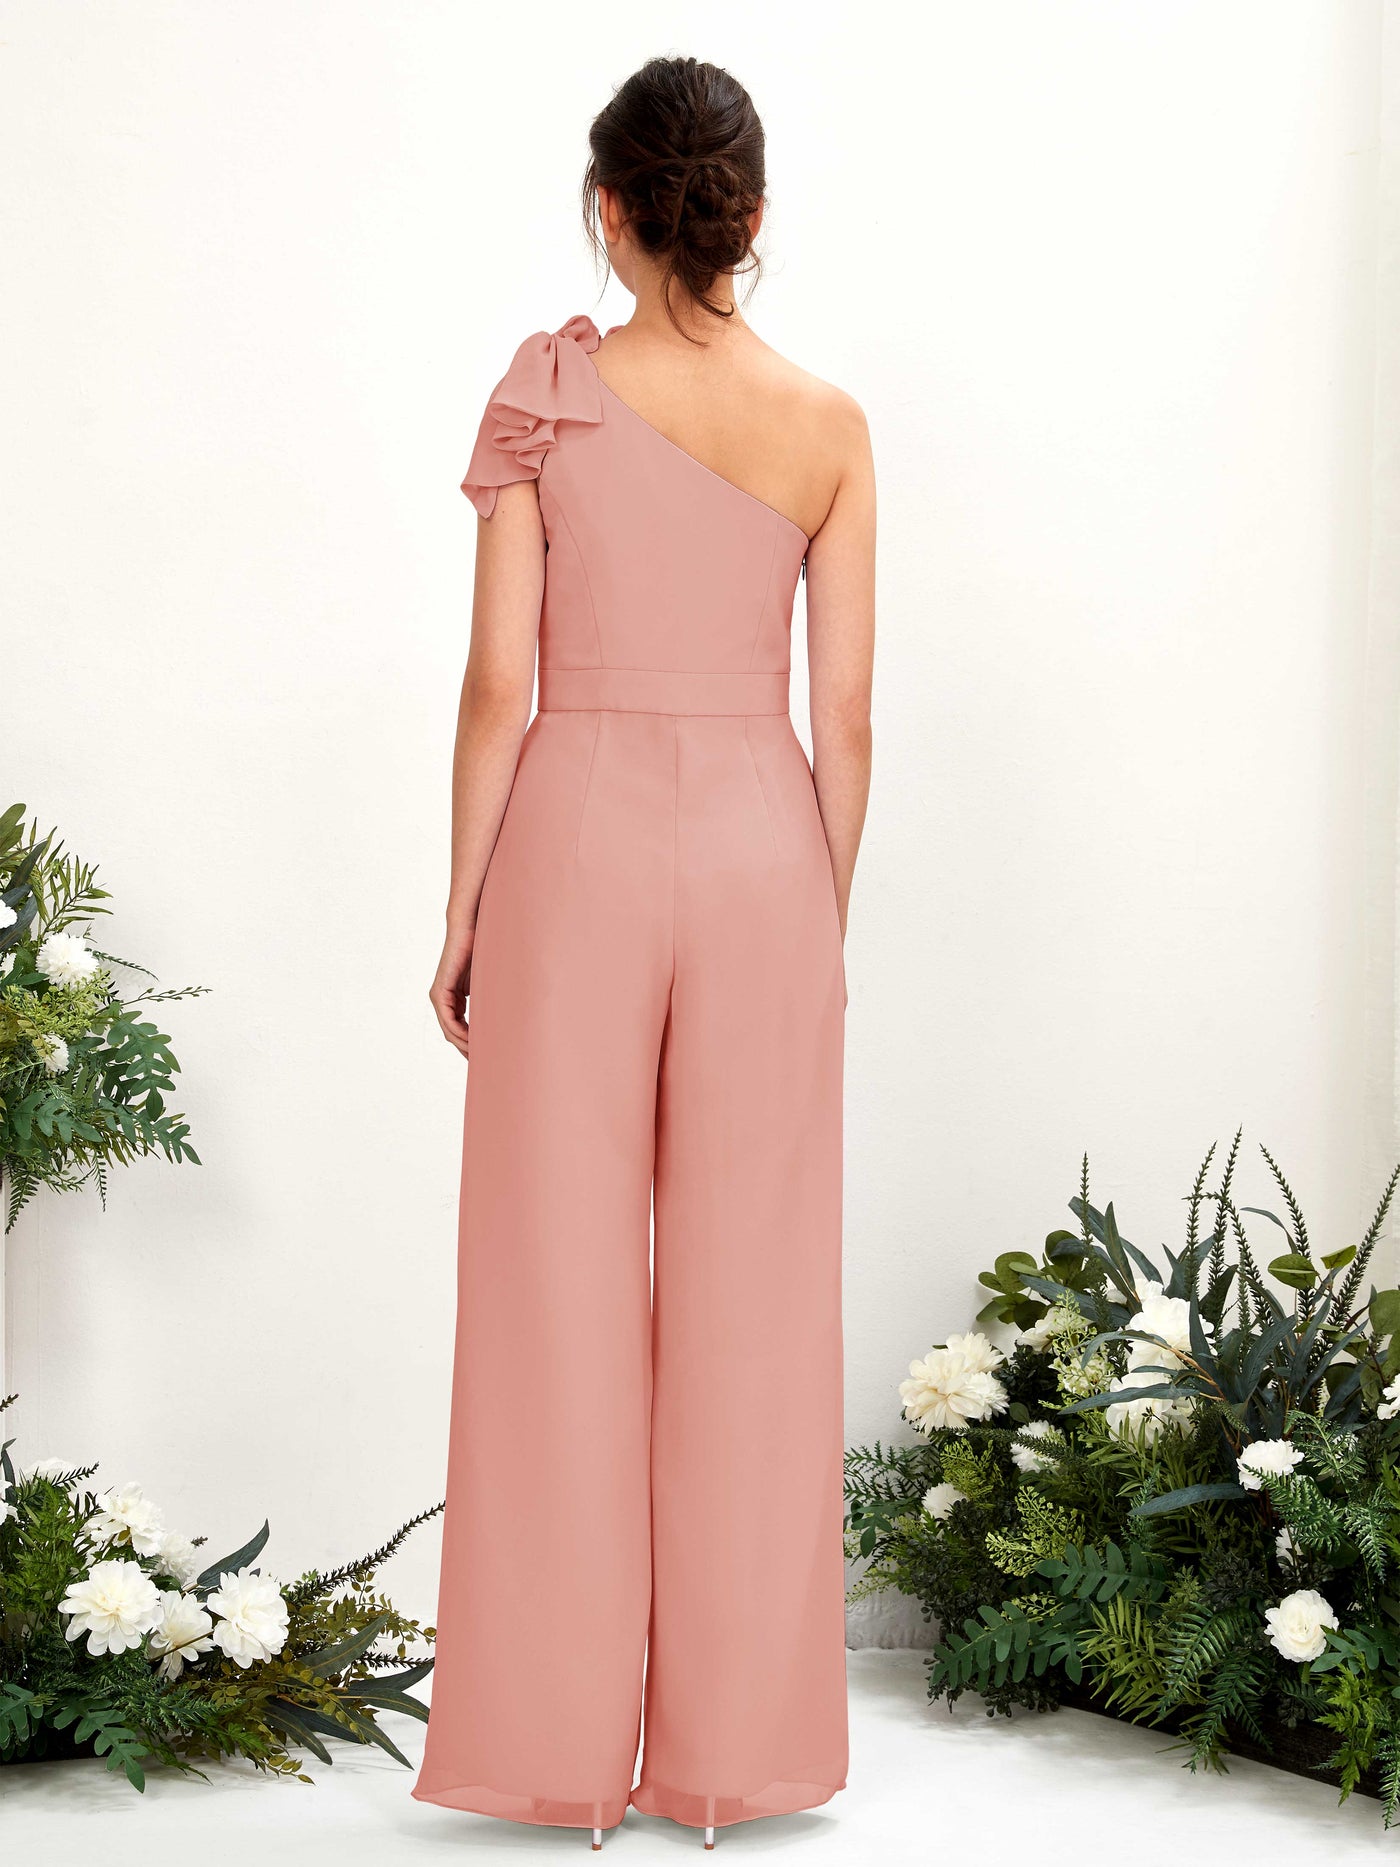 Champagne Rose Bridesmaid Dresses Bridesmaid Dress Chiffon One Shoulder Full Length Sleeveless Wedding Party Dress (81220806)#color_champagne-rose